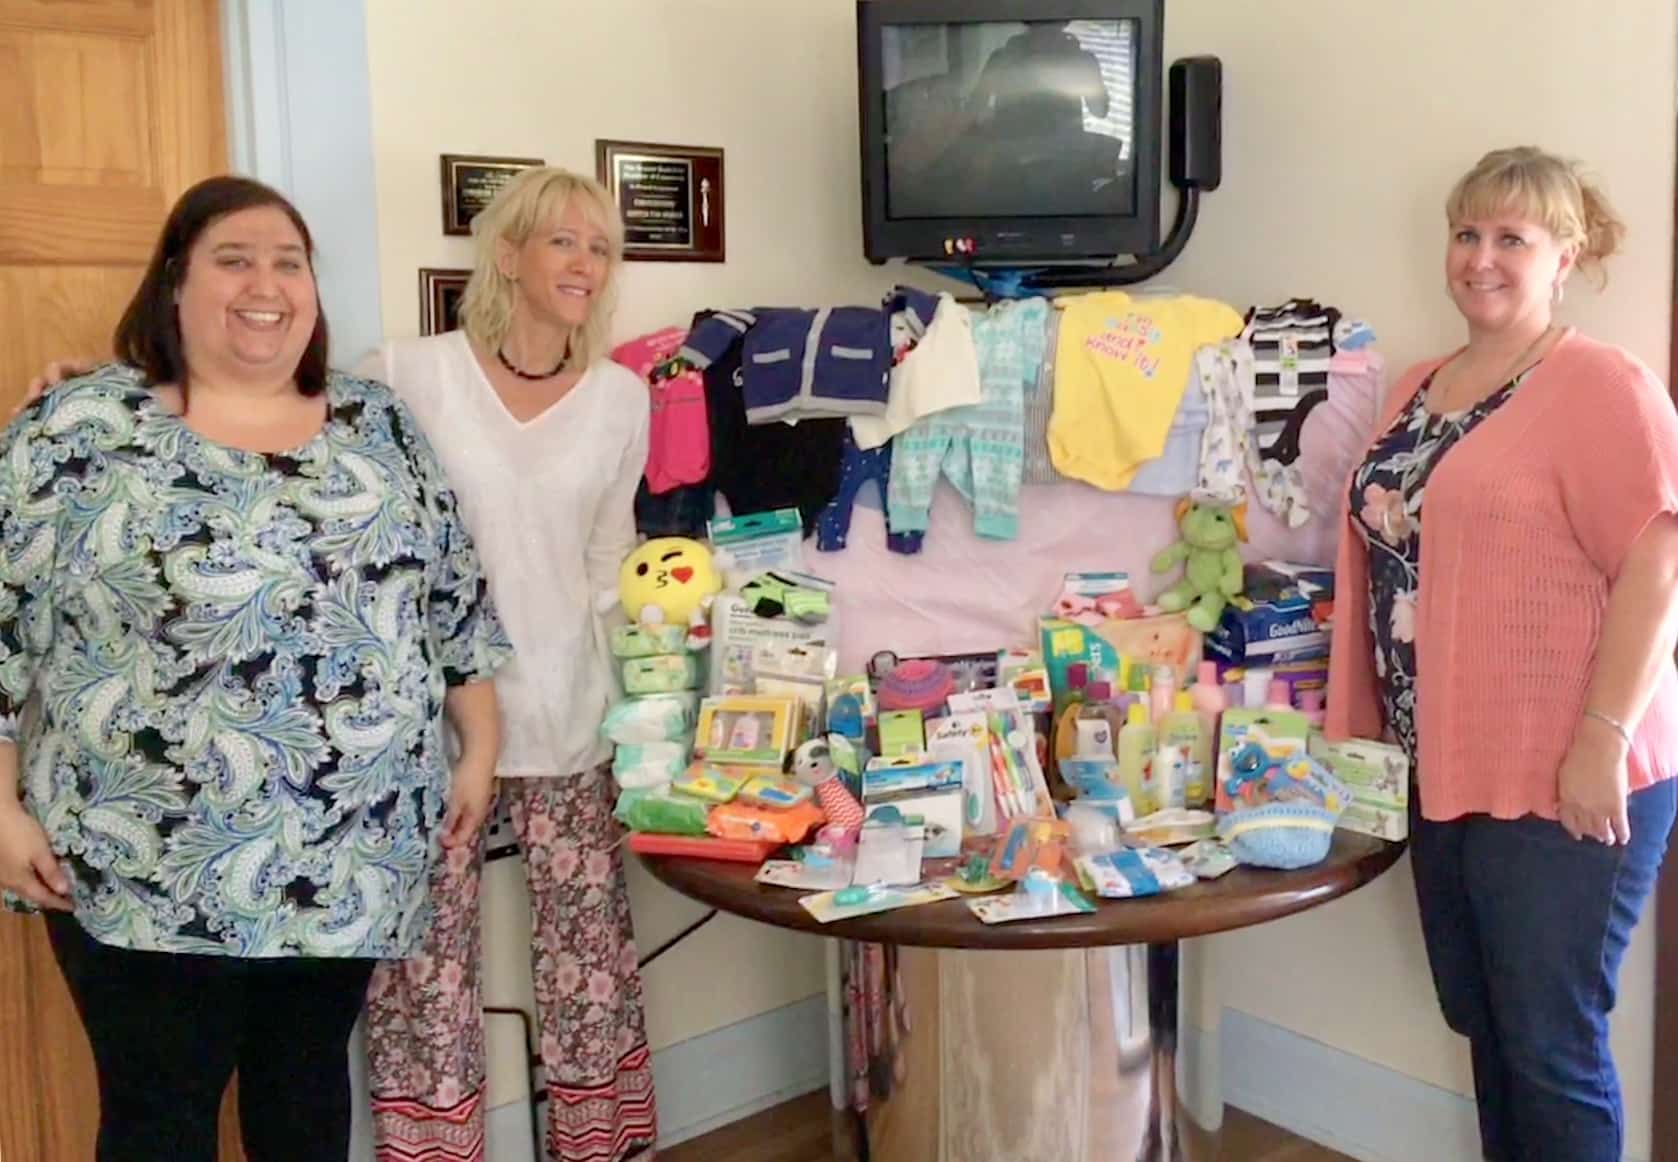 Mock Baby Shower Supports New Port Richey Pregnancy Center